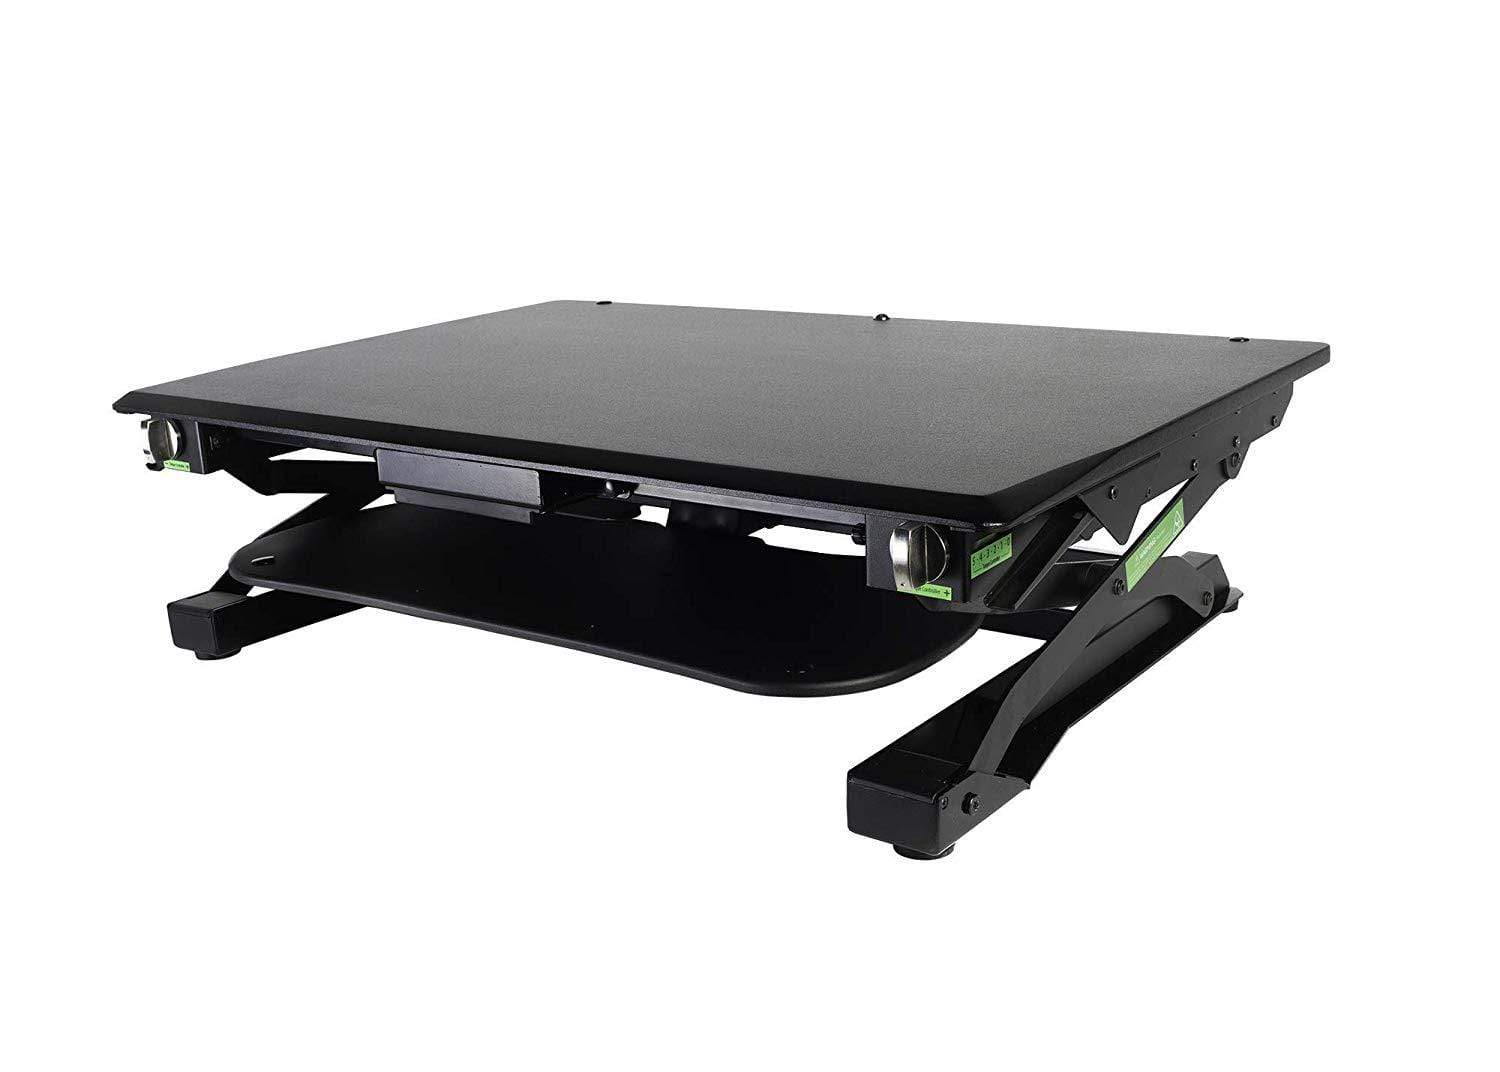 Goldtouch Sit-Stand Desktop Goldtouch EasyLift Pro Sit/Stand Desk W/Integrated Adjustable Keyboard Tray